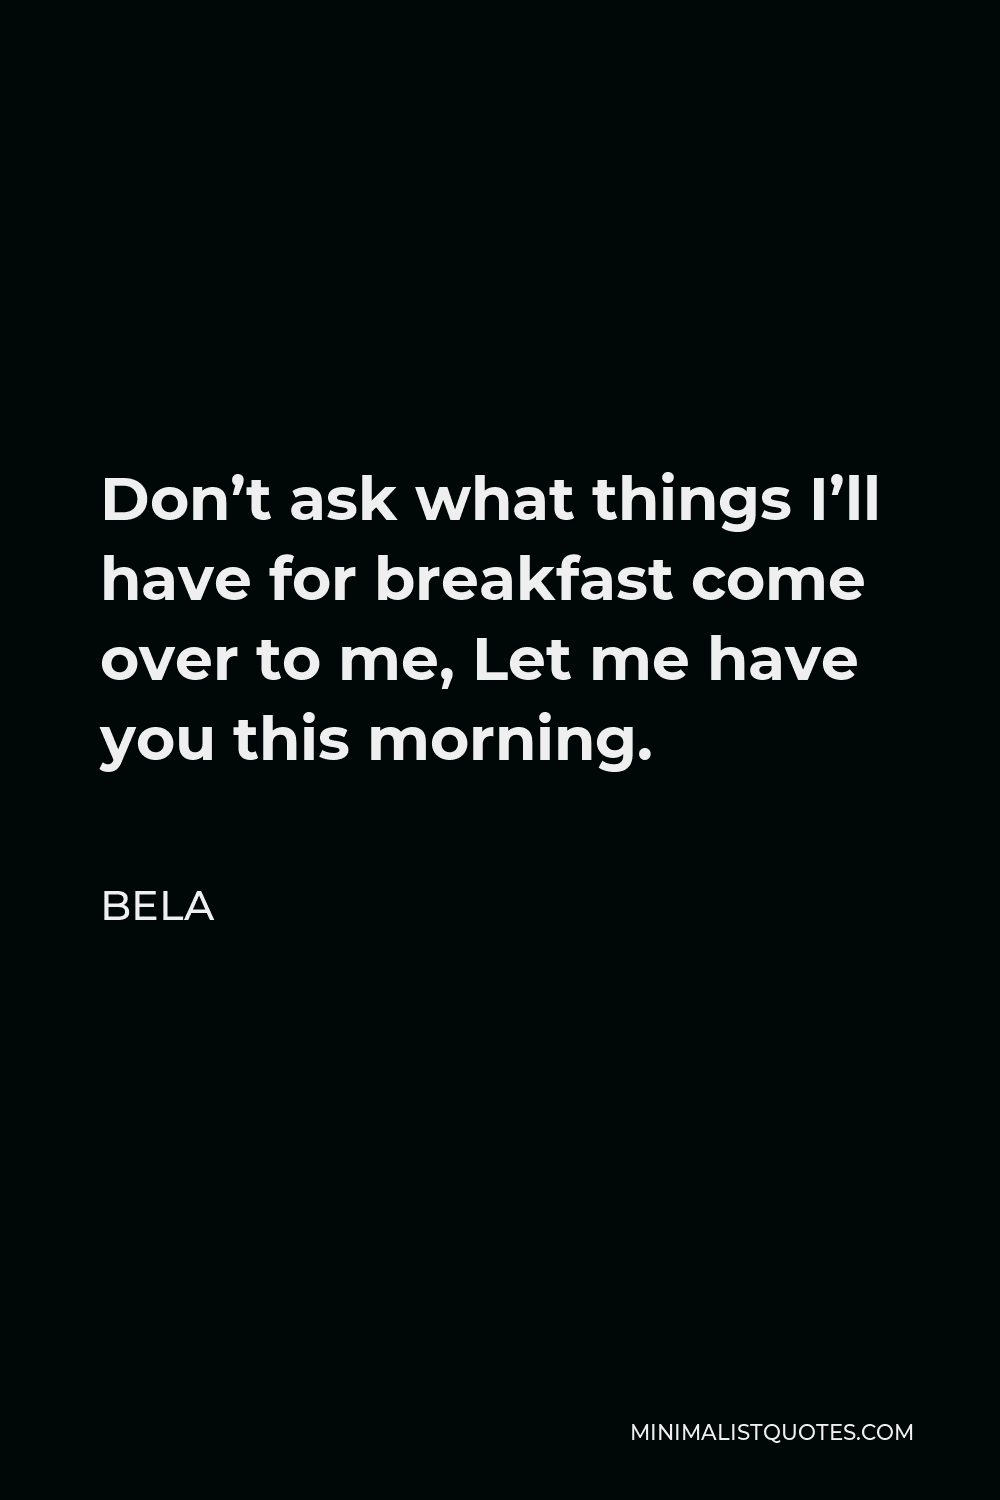 Bela Quote - Don’t ask what things I’ll have for breakfast come over to me, Let me have you this morning.